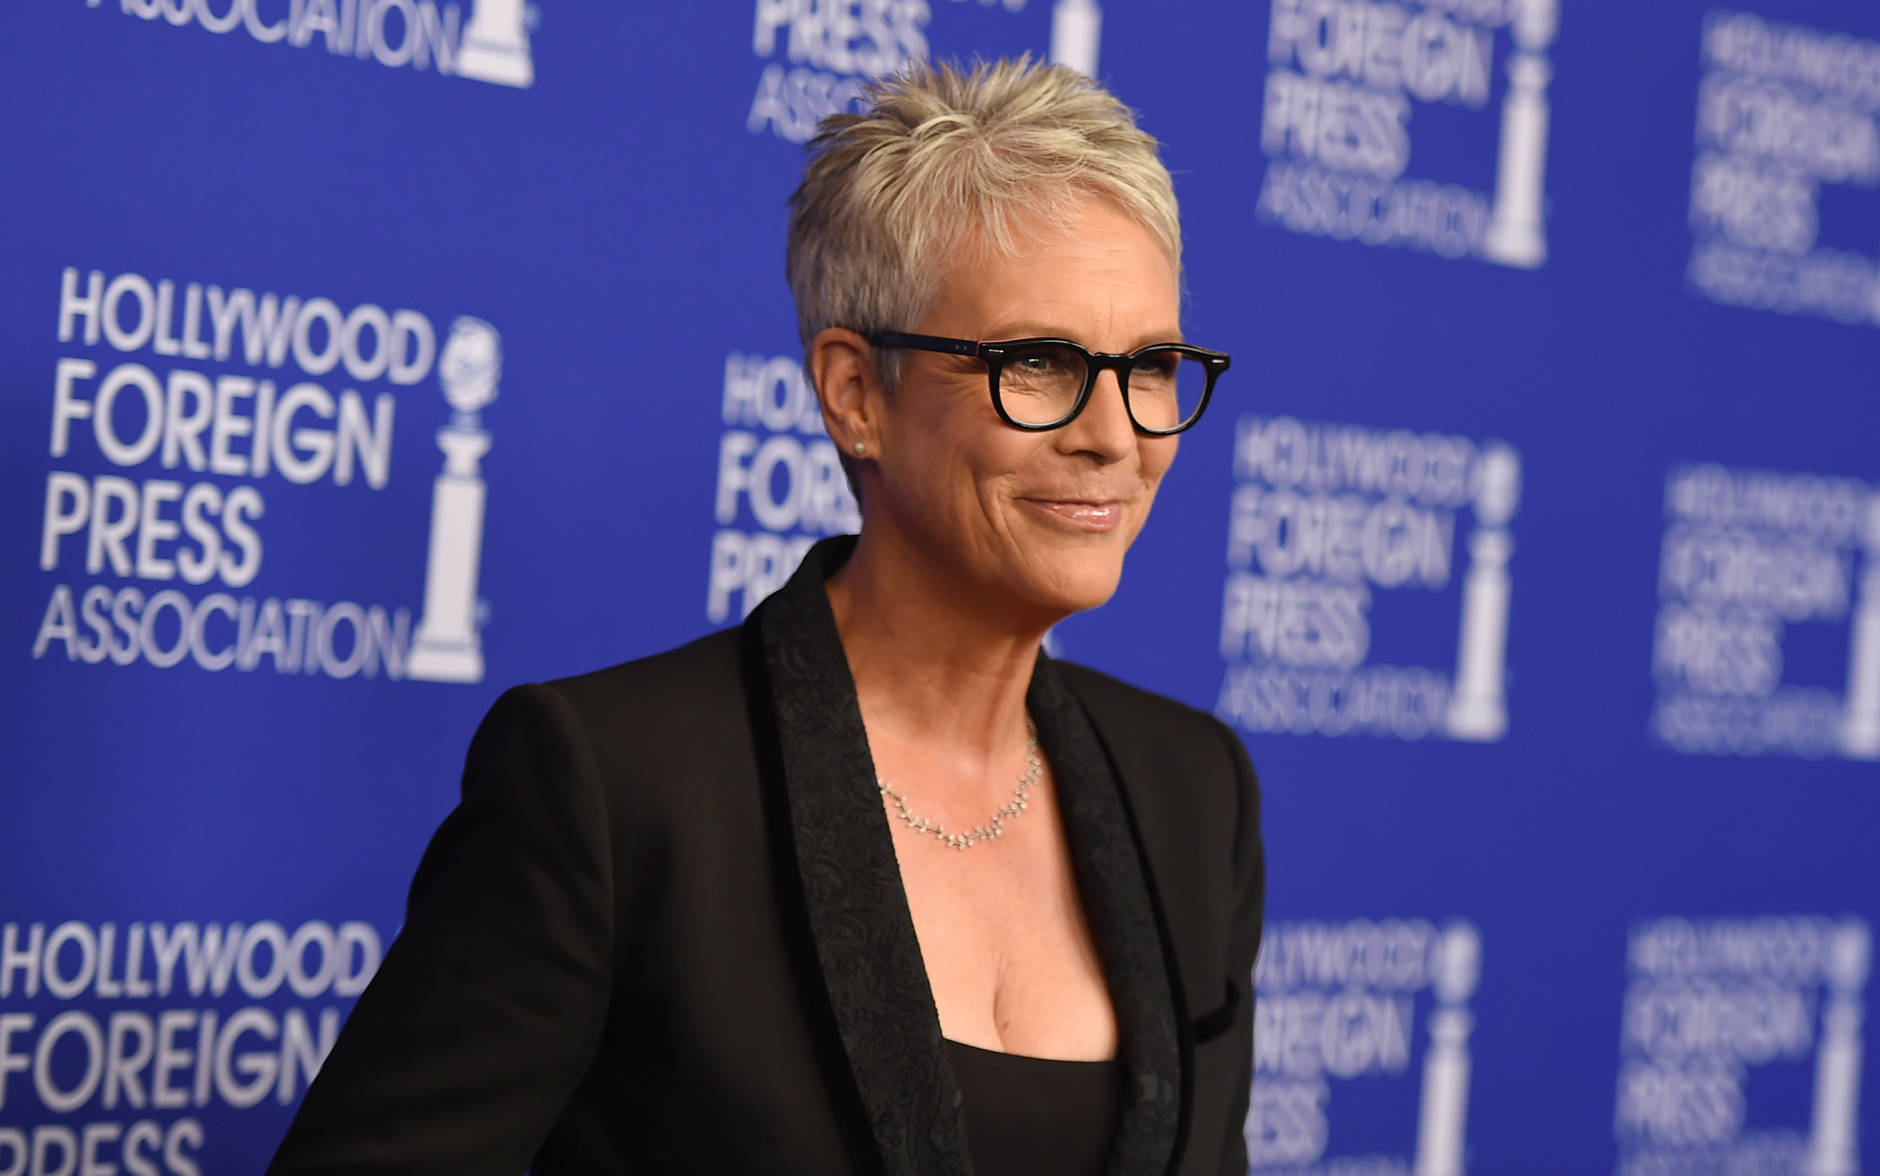 Jamie Lee Curtis arrives at the Hollywood Foreign Press Association Grants Banquet at the Beverly Wilshire hotel on Thursday, Aug. 4, 2016, in Beverly Hills, Calif. (Photo by Jordan Strauss/Invision/AP)